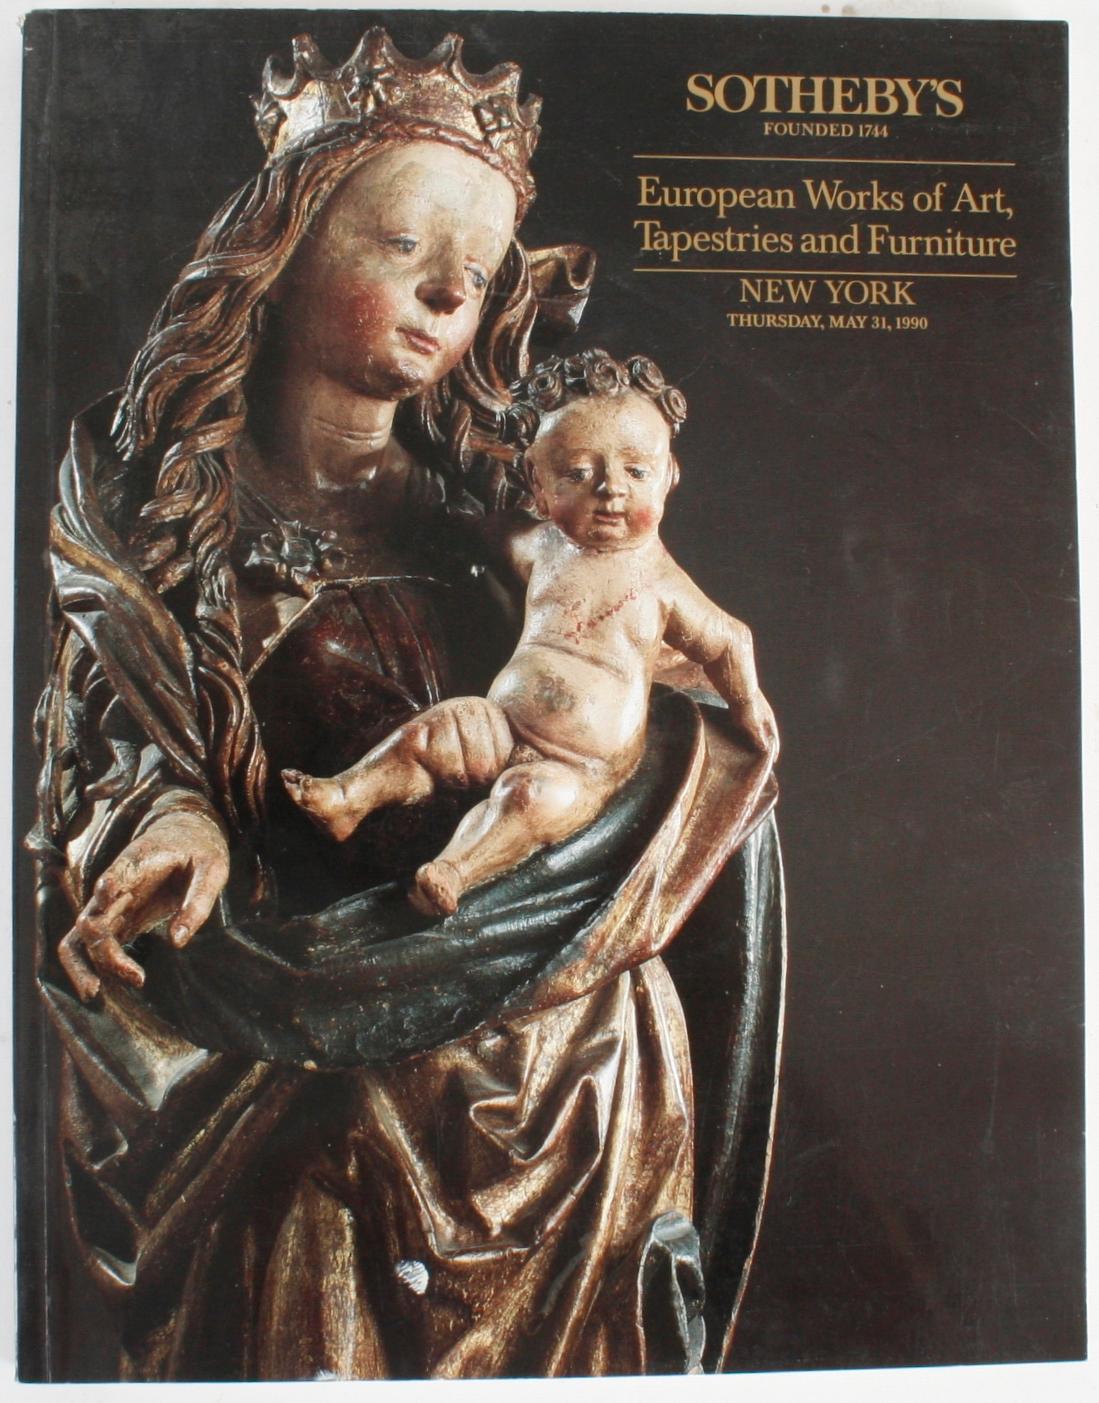 Sotheby's: New York: European works of art, arms and armour, furniture and tapestries, January 29, 1998. 222 pages of 481 lots with results. Sotheby's: New York: European works of art, tapestries, and furniture, May 31, 1990. 370 lots.
  